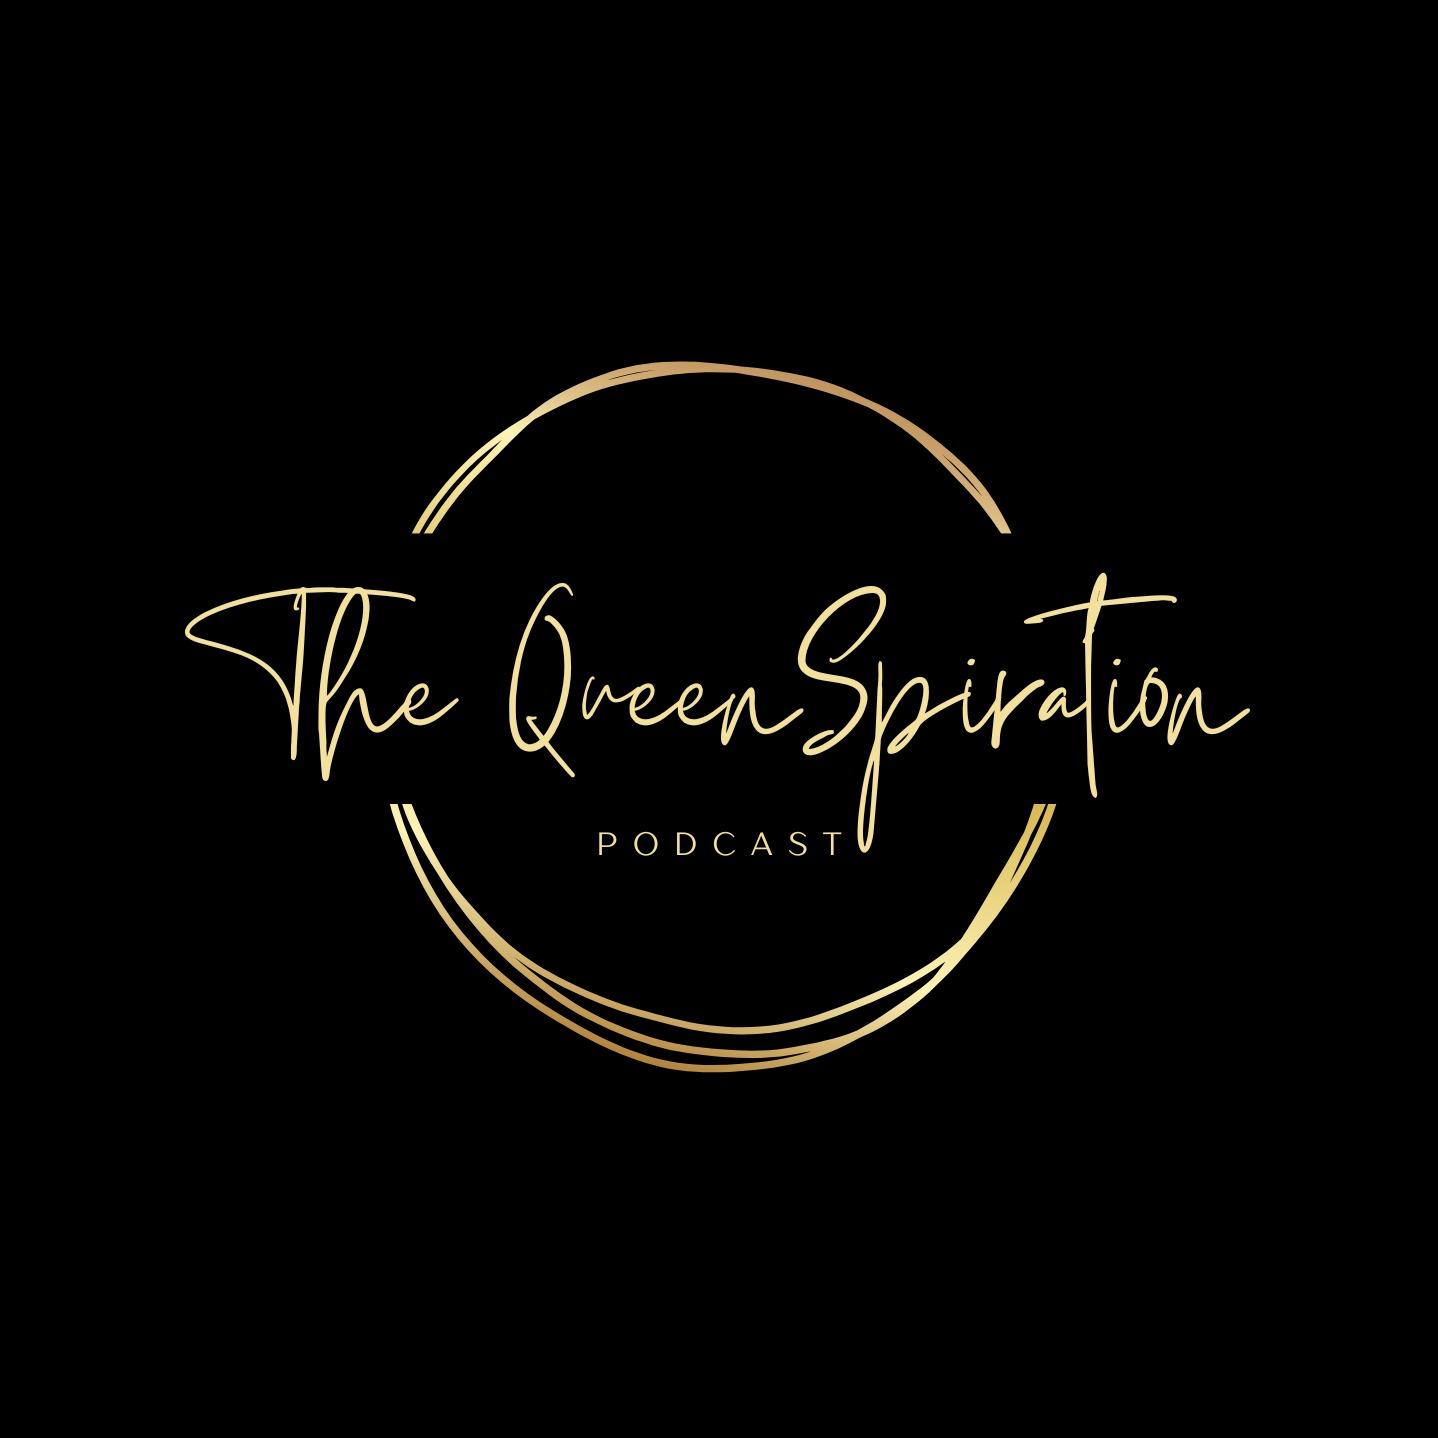 The Queenspiration Podcast